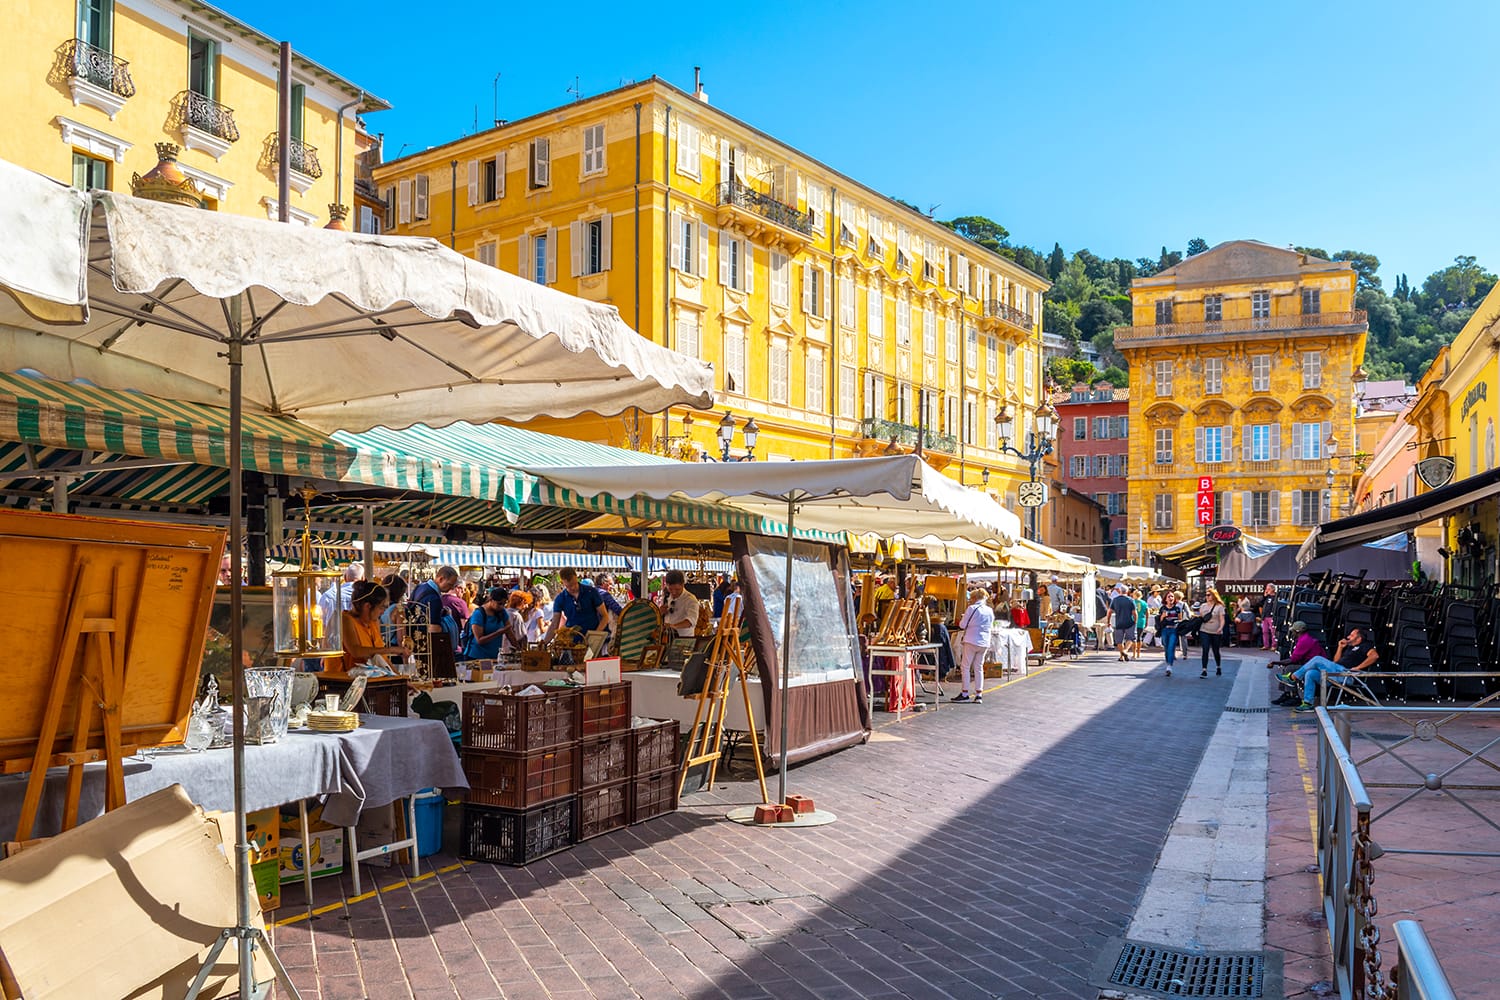 People enjoying a summer day at the outdoor market at Cours Saleya in Old Town Vieux, Nice, on the French Riviera.